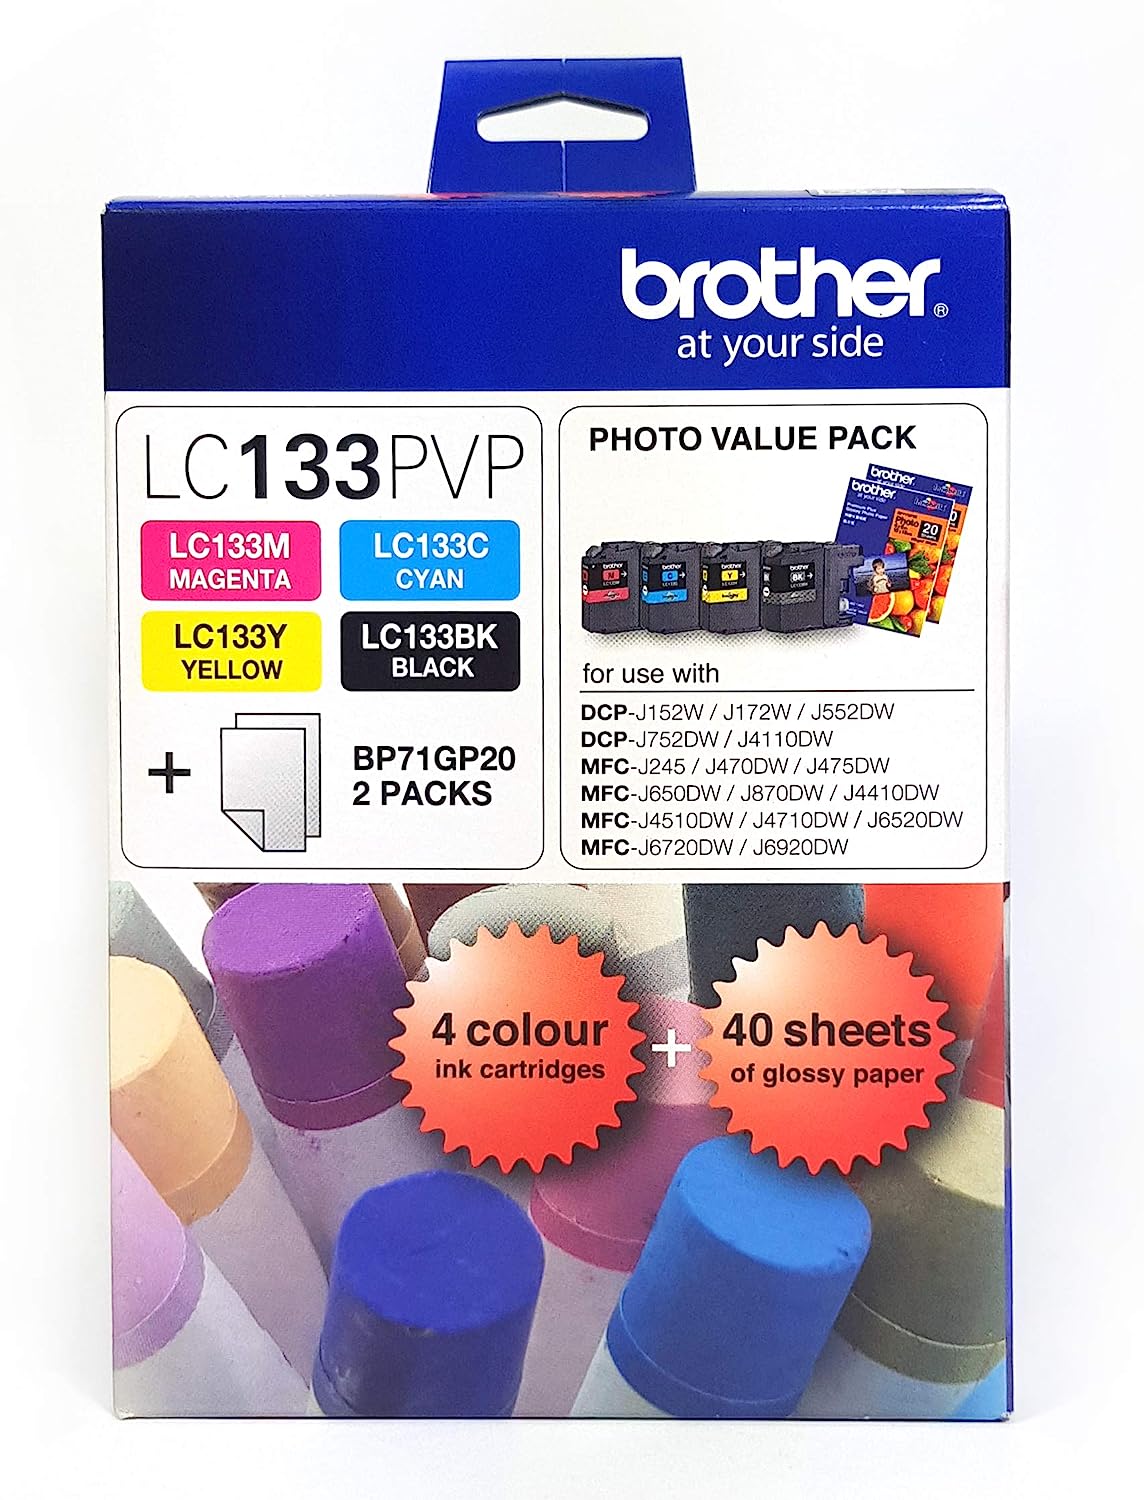 LC133PVP Brother Photo Value Pack